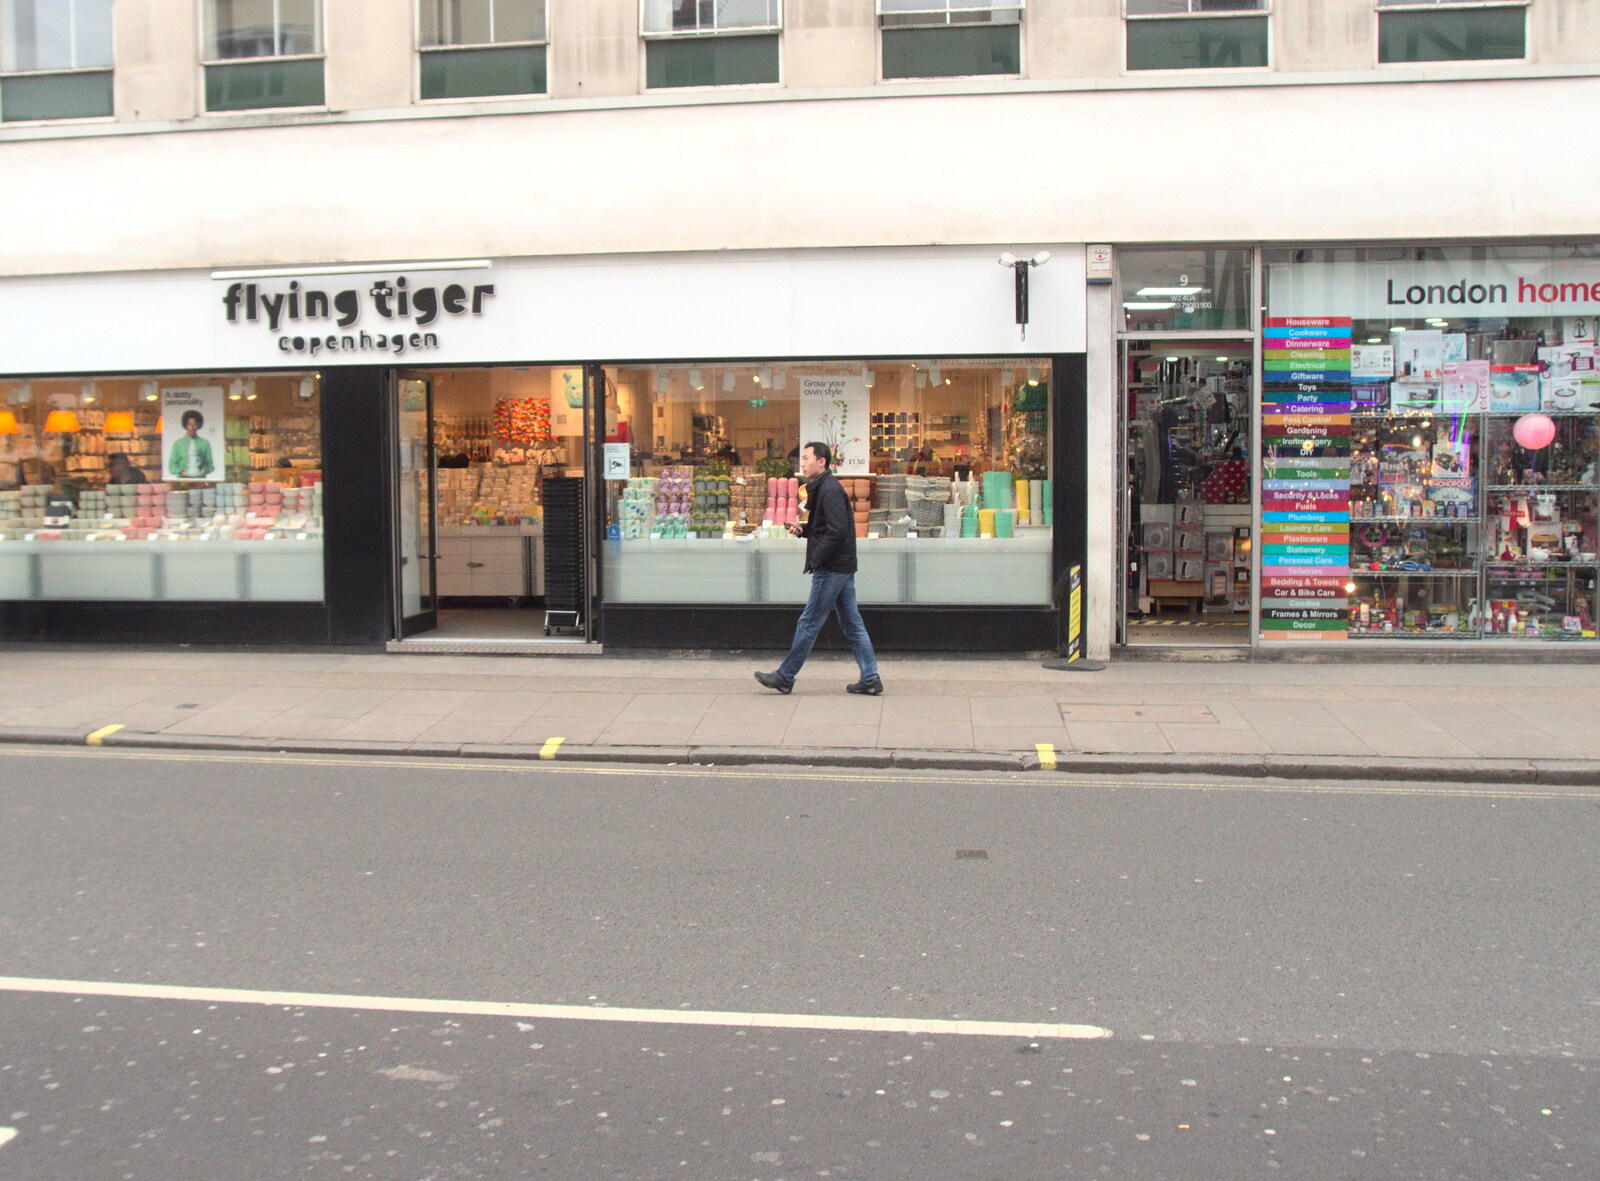 Danfeng strides past Flying Tiger in Bayswater from The Last Trip to the SwiftKey Office, Paddington, London - 23rd February 2022